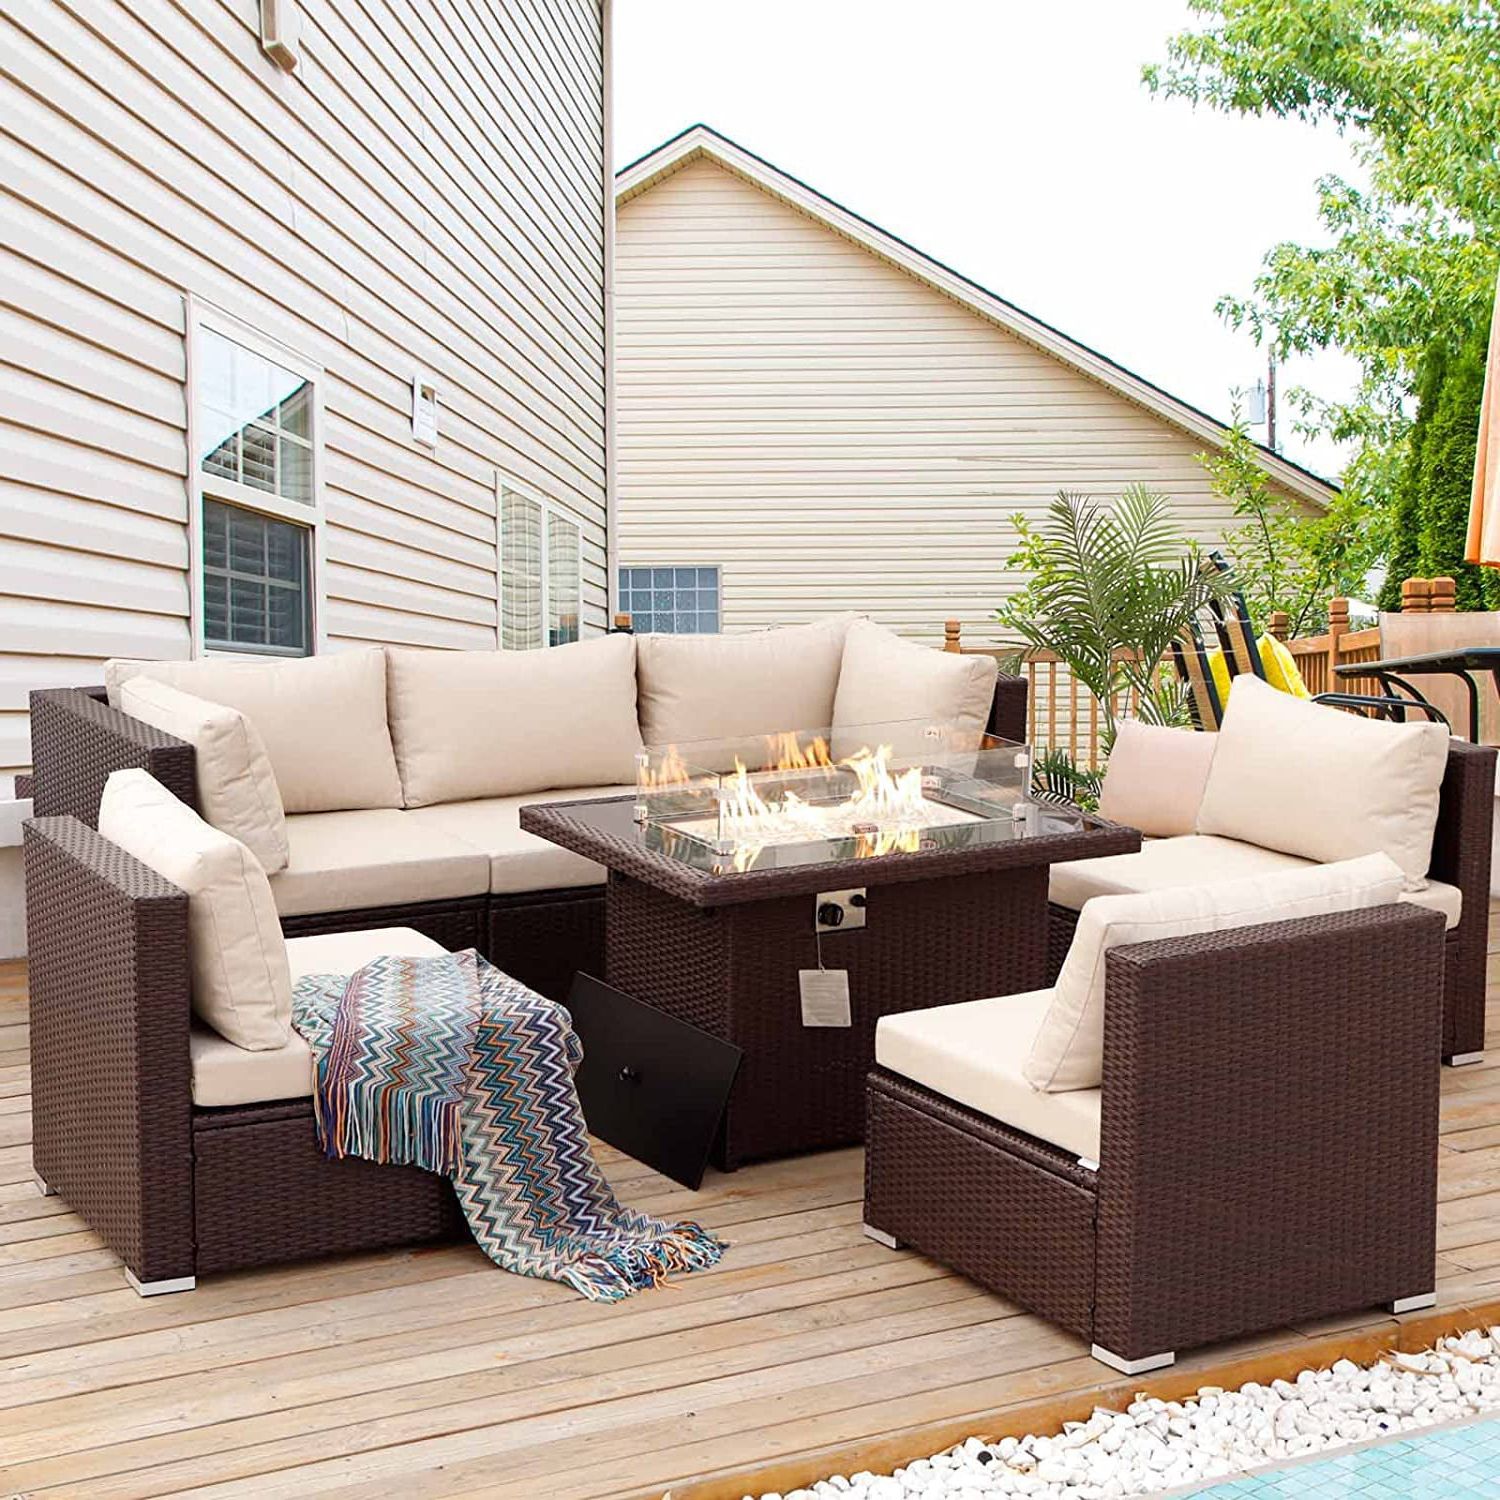 Fire Pit Table Wicker Sectional Sofa Conversation Set Regarding Well Known Nicesoul 7 Pcs Outdoor Furniture With Fire Pit Table Wicker Patio Sectional  Sofa Conversation Sets, Espresso – Walmart (View 4 of 15)